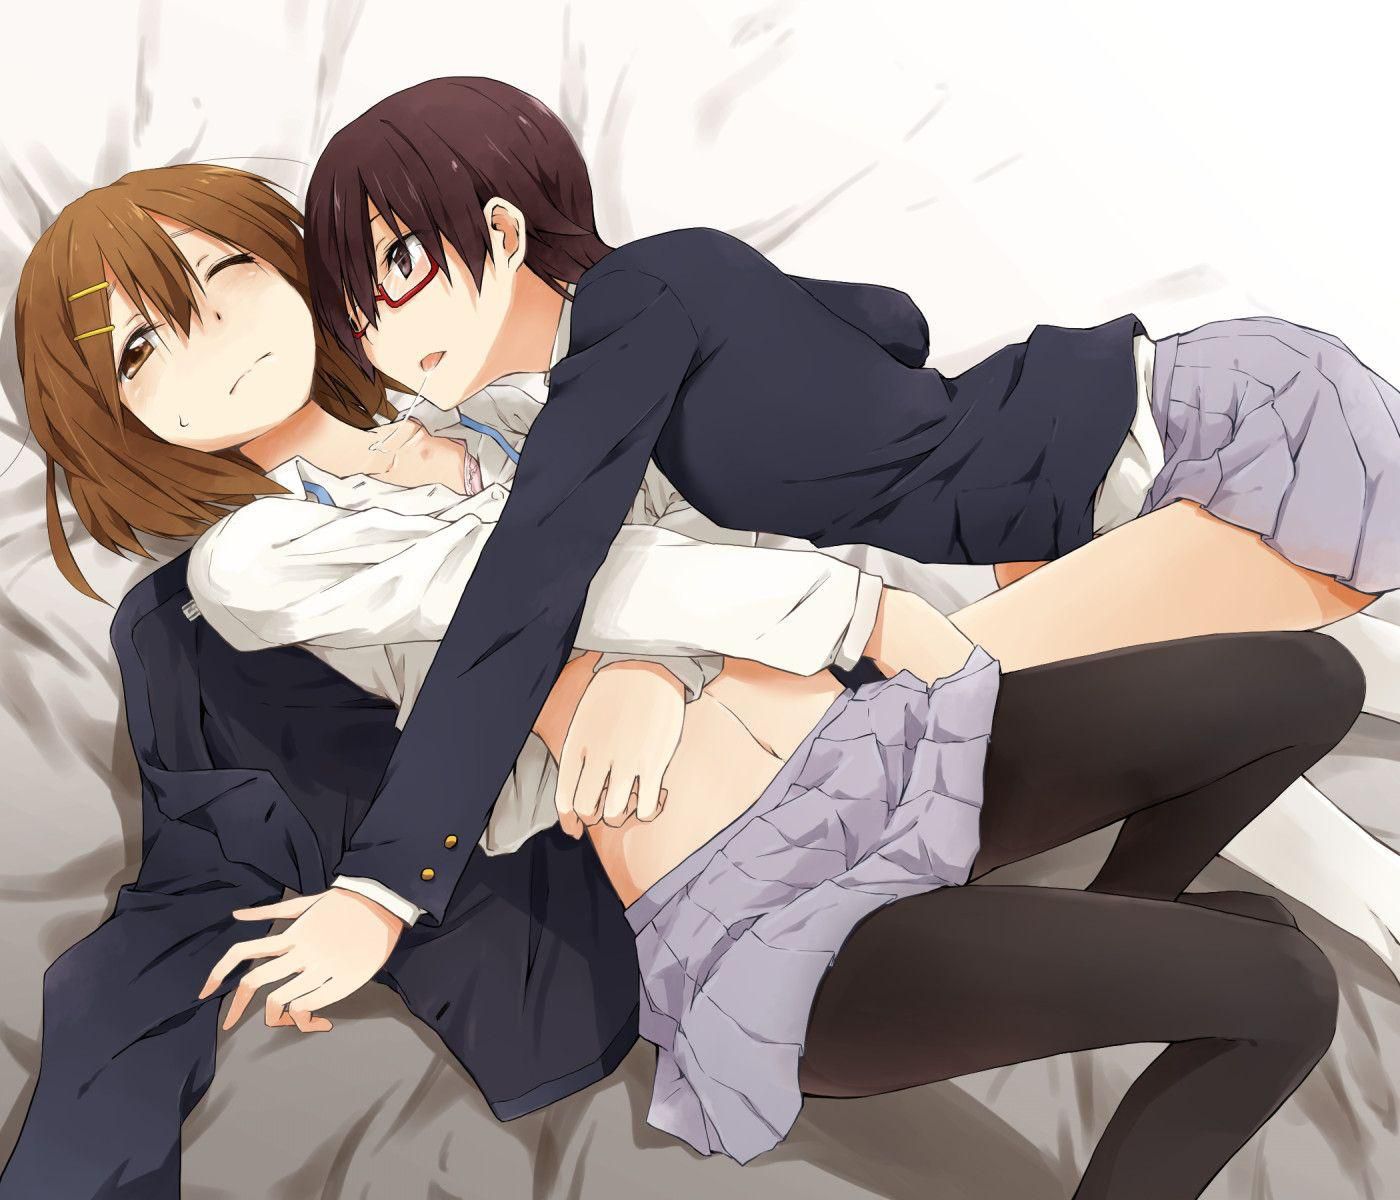 【Erotic Images】 I tried to collect cute images of Yui Hirasawa, but it is too erotic ... (Keion!) ) 8